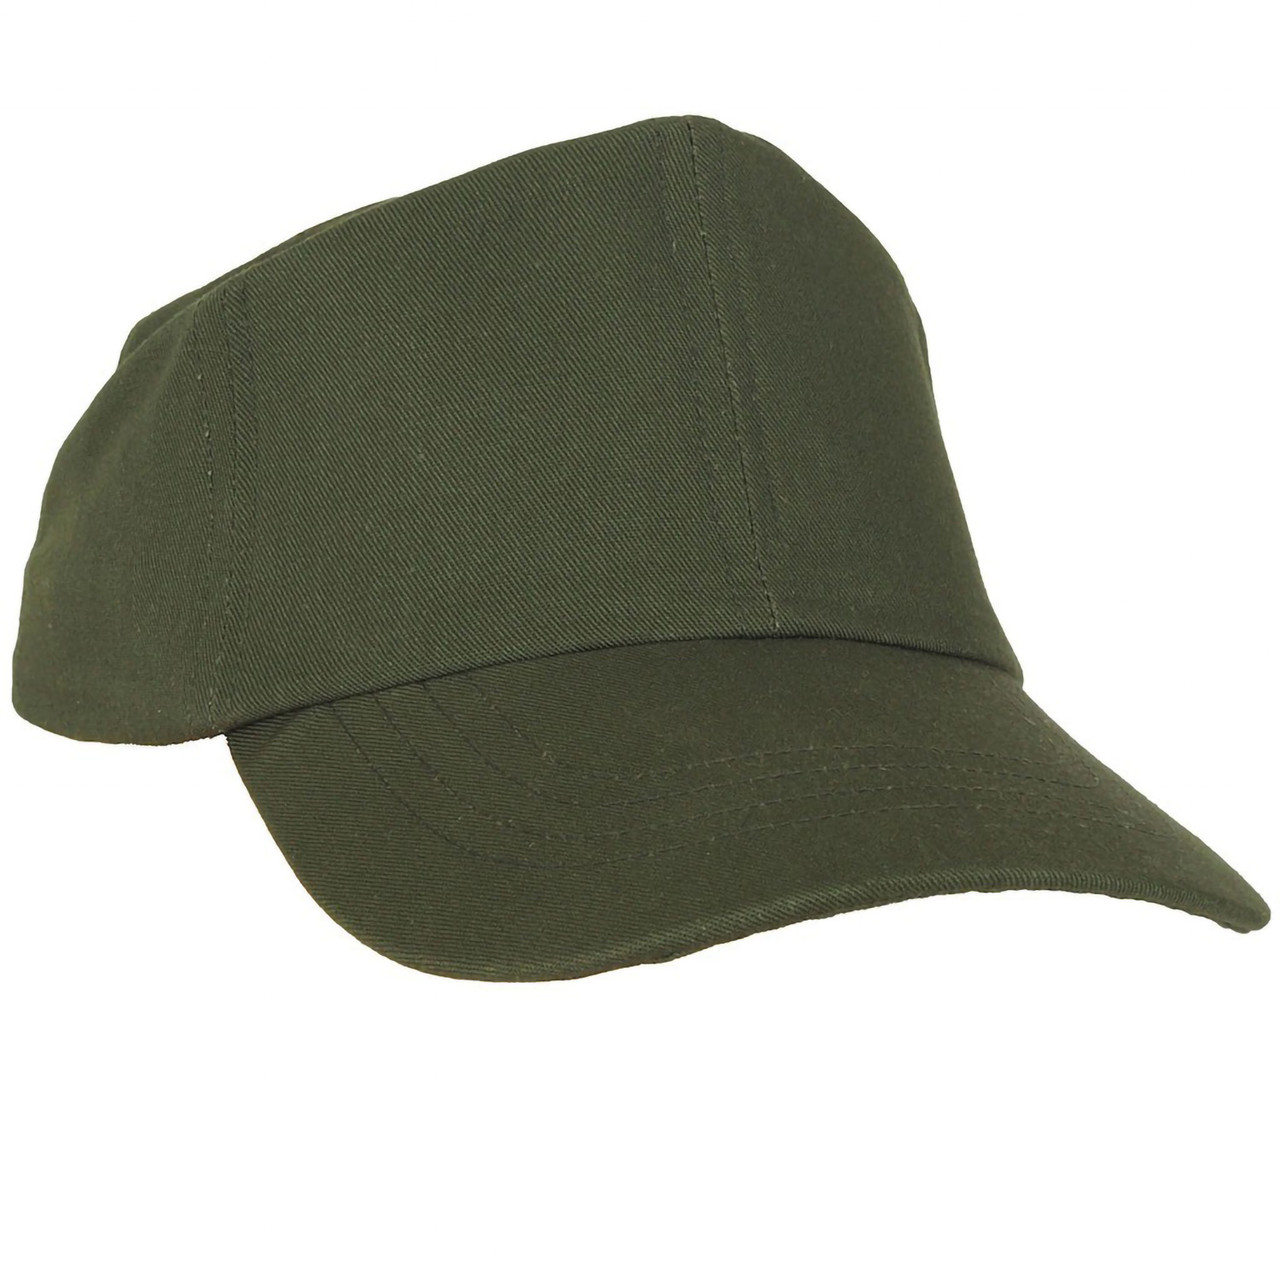 US Army Military Hot Weather Cap Size 7 海外 即決 - スキル、知識